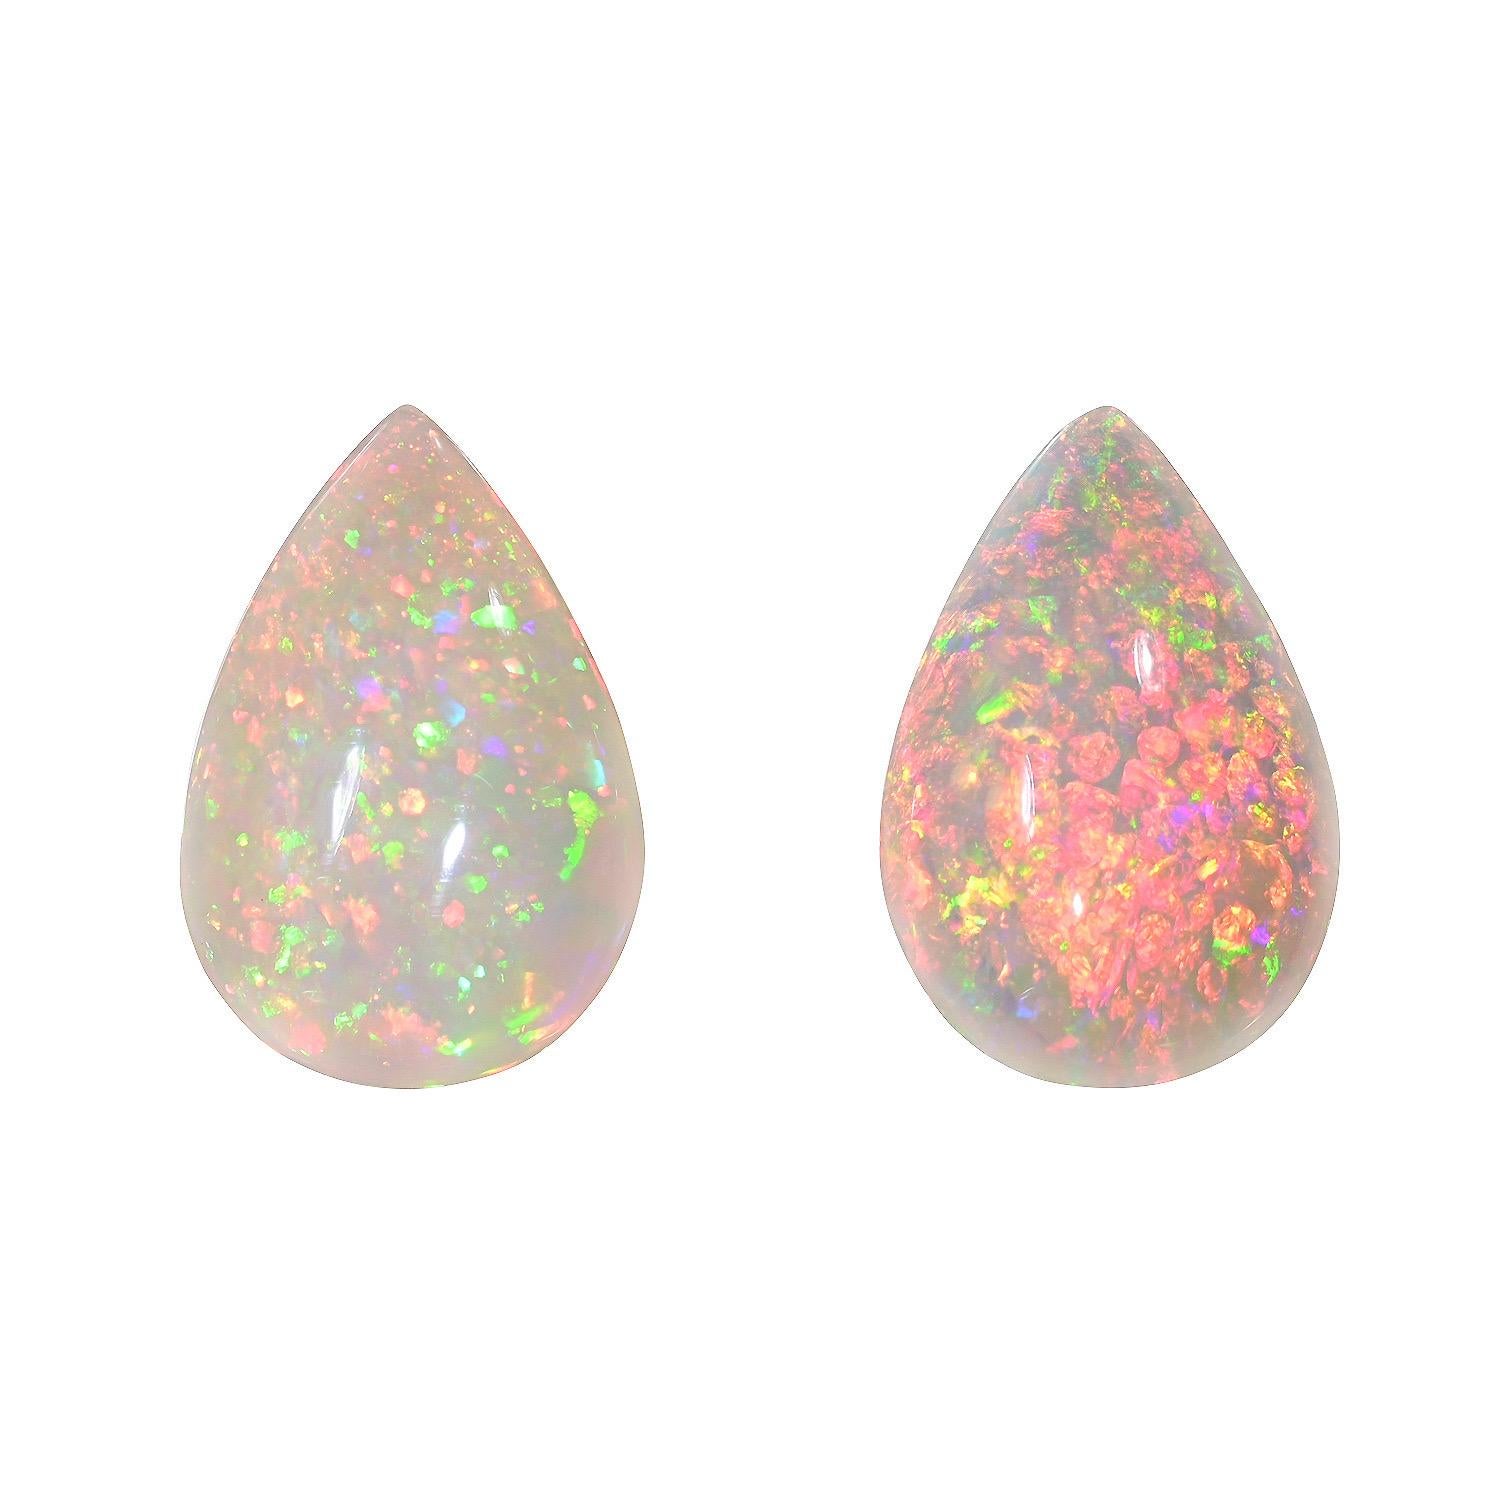 Natural 12.34 carat Ethiopian Opal loose gemstone pear shape pair, offered unmounted to someone very special.
Returns are accepted and paid by us within 7 days of delivery.
We offer supreme custom jewelry work upon request. Please contact us for